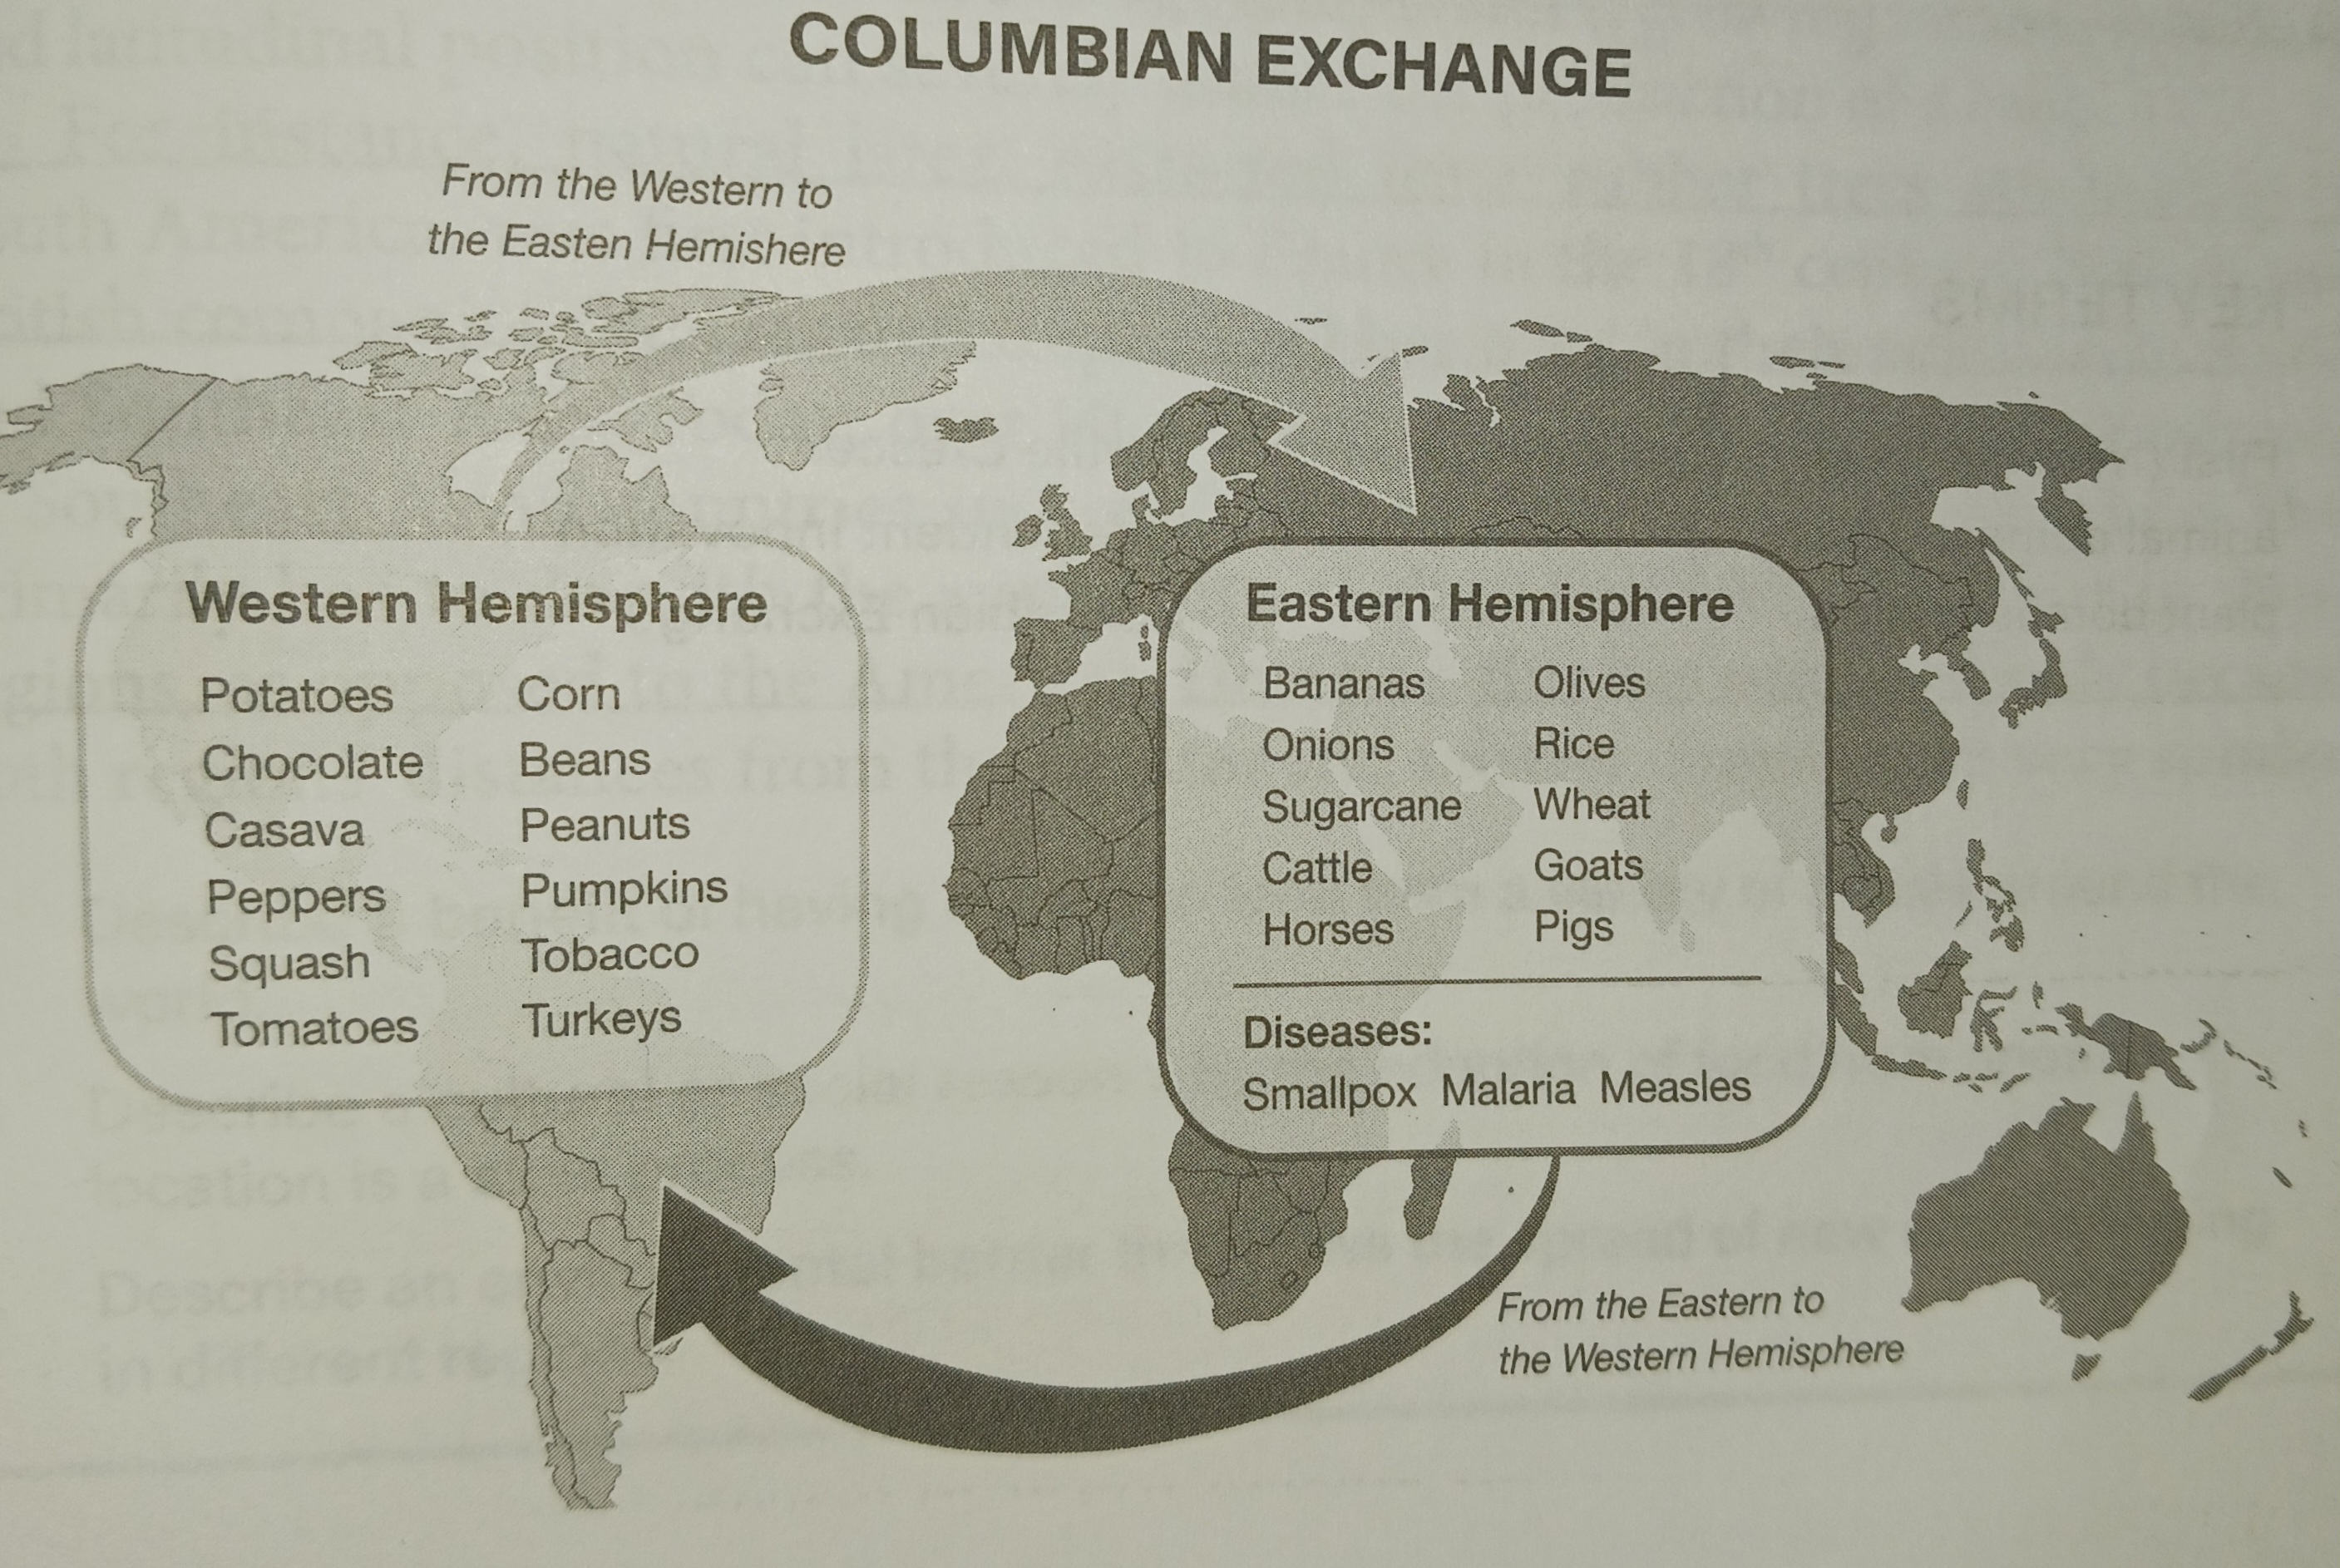 <p><strong>Pros:</strong></p><p>1. <strong>Cultural Exchange</strong>: The Columbian Exchange facilitated the exchange of ideas, languages, religions, and cultural practices between the Eastern and Western Hemispheres. This led to a rich cultural blend, contributing to the diversity of global cultures.</p><p>2. <strong>Biological Diversity</strong>: The exchange introduced new crops, animals, and plants to different parts of the world, enriching agricultural practices and diets. For example, crops like maize, potatoes, and tomatoes from the Americas became staple foods in various regions.</p><p>3. <strong>Technological Diffusion</strong>: The exchange also spread technologies and innovations, such as new farming techniques and navigation methods, which improved living standards and expanded trade routes.</p><p><strong>Cons:</strong></p><p>1. <strong>Disease Spread</strong>: The Columbian Exchange resulted in the inadvertent transmission of diseases between continents, leading to devastating epidemics among indigenous populations. Diseases like smallpox, measles, and influenza, to which Native Americans had no immunity, caused widespread death and population decline.</p><p>2. <strong>Ecological Disruption</strong>: Introduction of non-native species to new ecosystems disrupted local flora and fauna, leading to ecological imbalances and biodiversity loss. For instance, invasive species like rats and weeds caused harm to native species and ecosystems.</p><p>3. <strong>Social Disruption</strong>: The exchange also brought about social upheaval and conflicts as European powers colonized and exploited indigenous populations for labor and resources, leading to displacement, enslavement, and cultural suppression of indigenous peoples.</p>